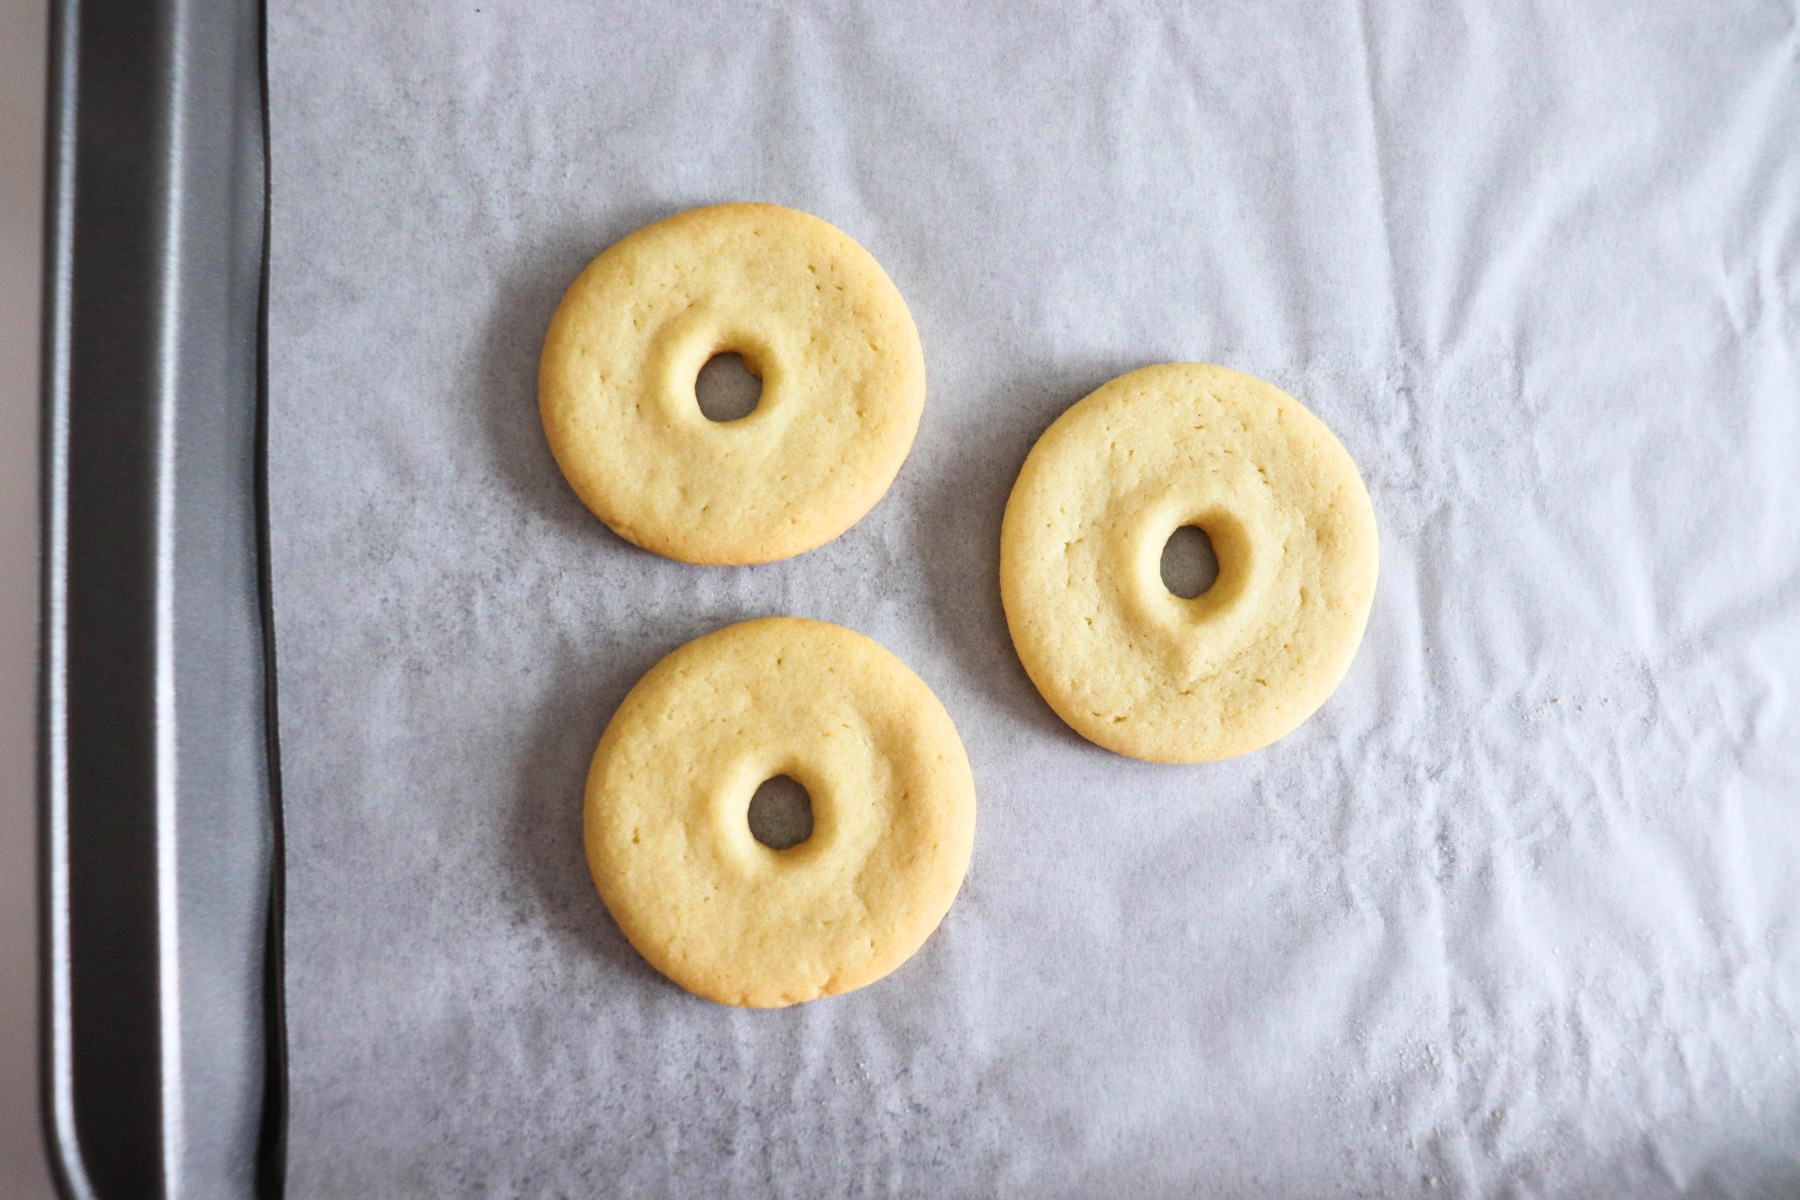 baking the donut shaped sugar cookies